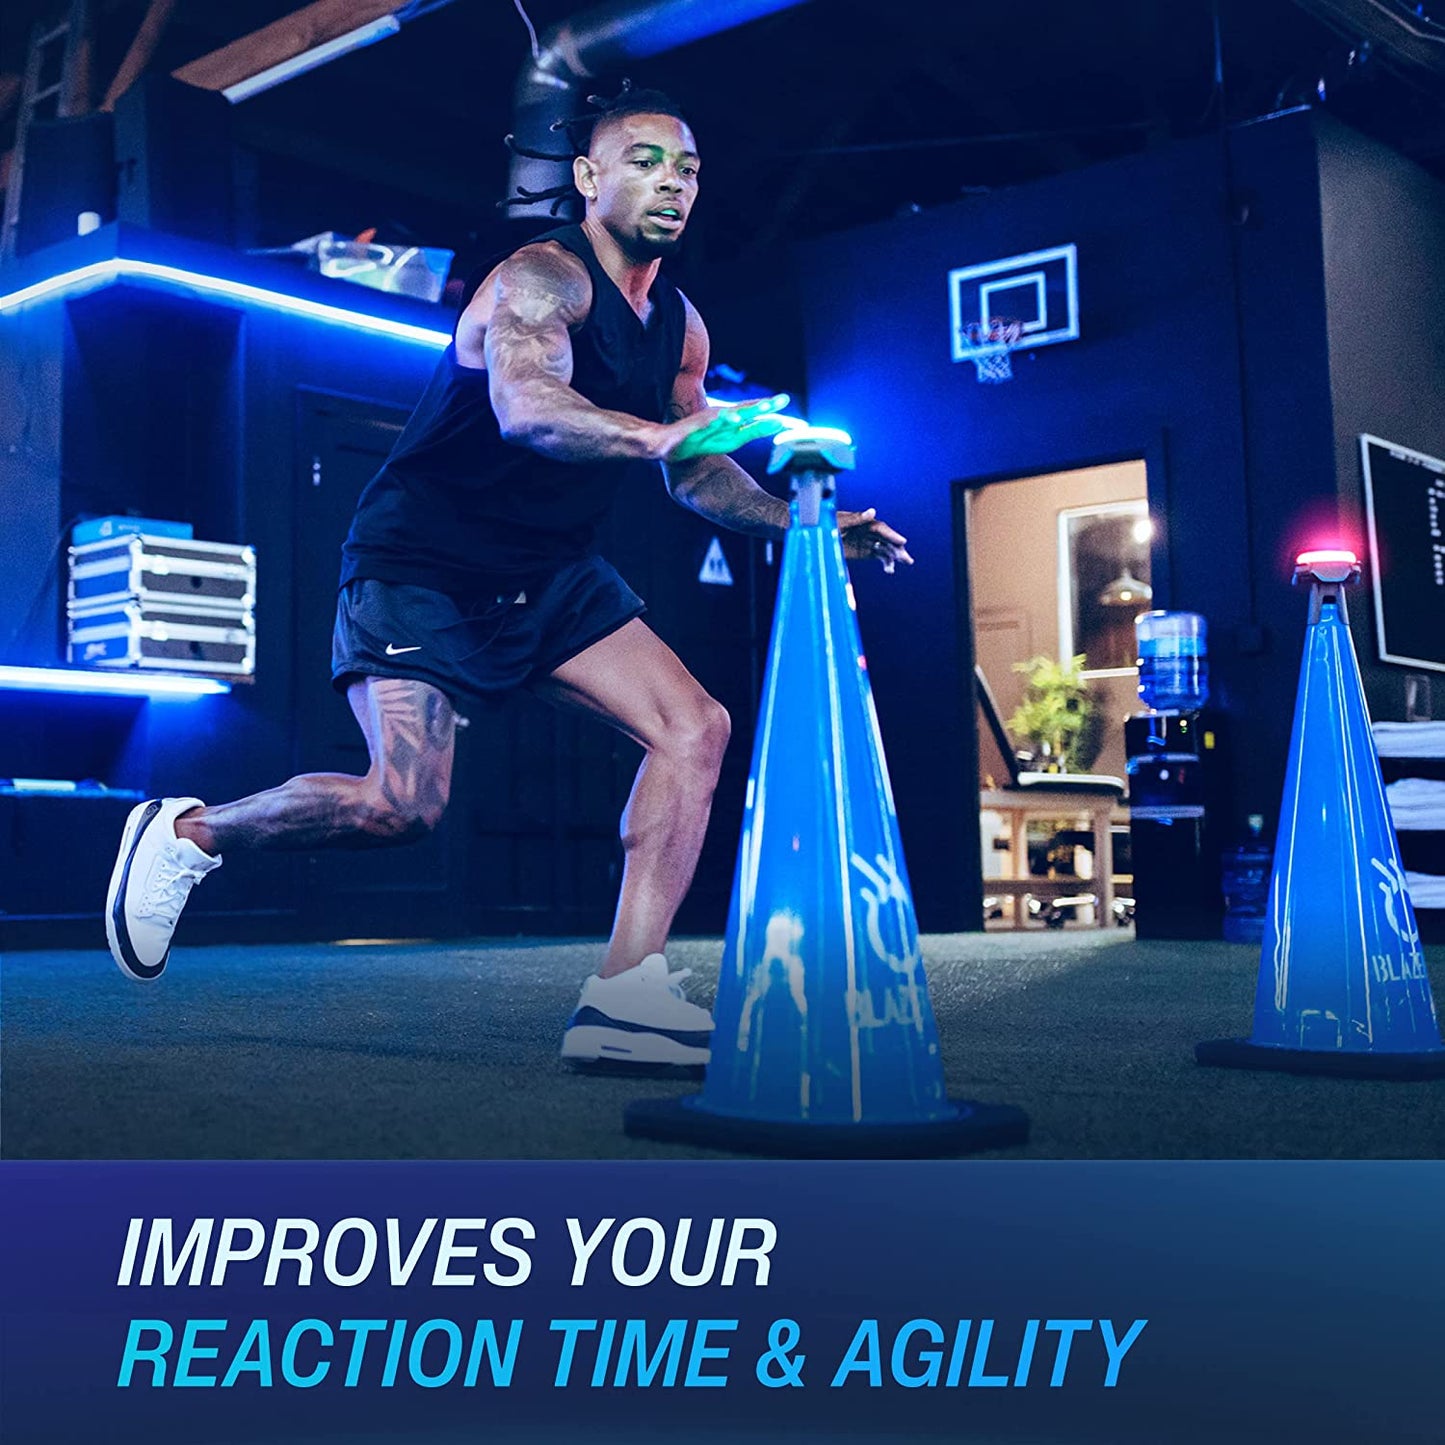 Reaction Training Platform Improves Reaction Time and Agility for Athletes, Trainers, Coaches, Physical & Neurological Therapists, Fitness Trainers, Physical Educators